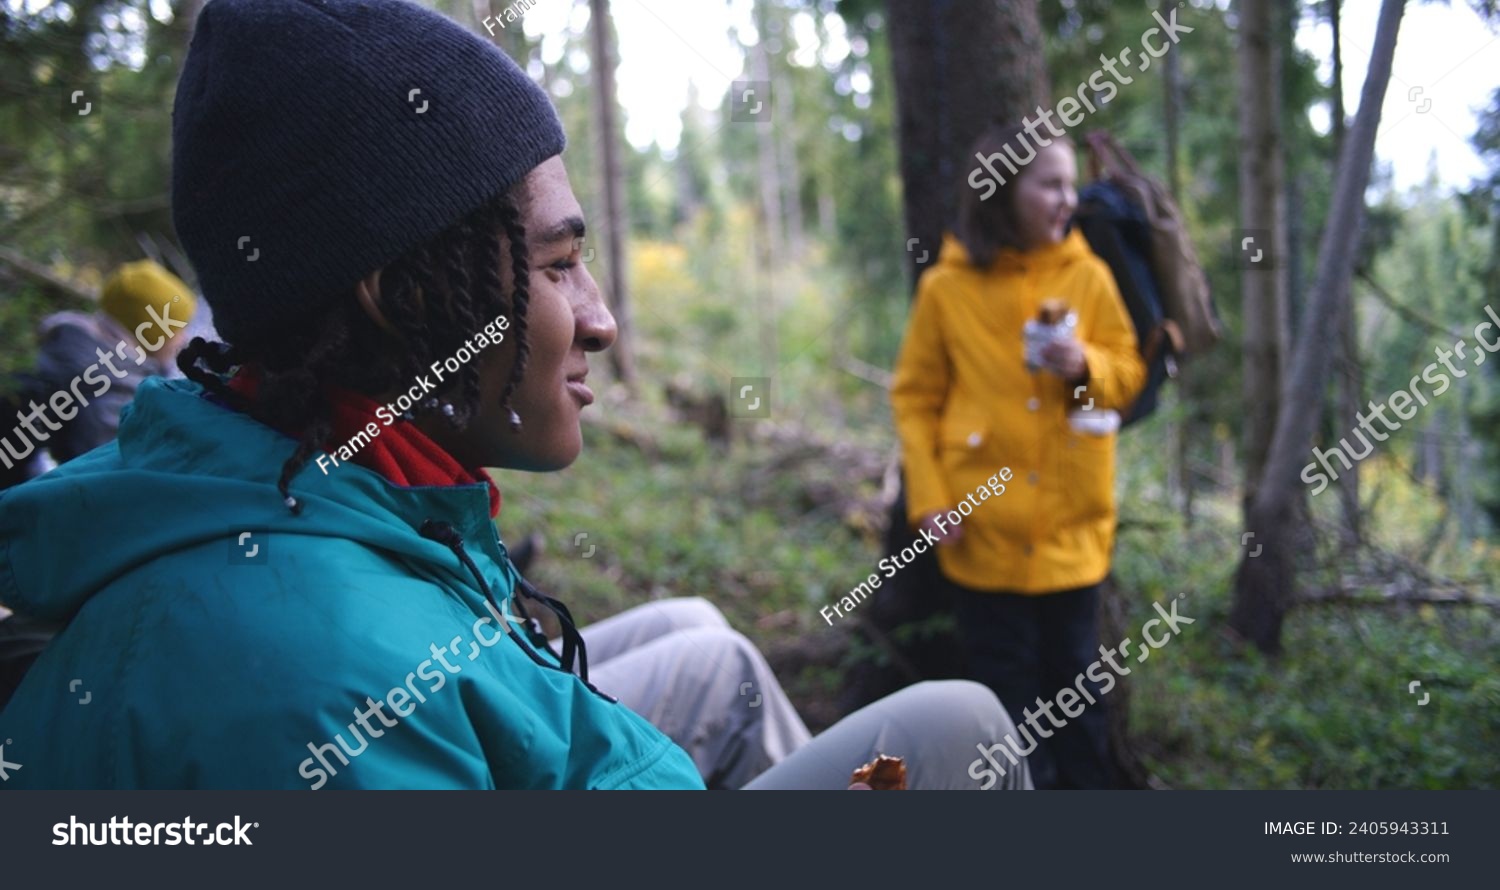 Group of travelers resting in camp after long walking trek in the mountains. Multiethnic young hikers talking, having snack in the forest during tourist trip or hike in autumn. Active leisure concept. #2405943311